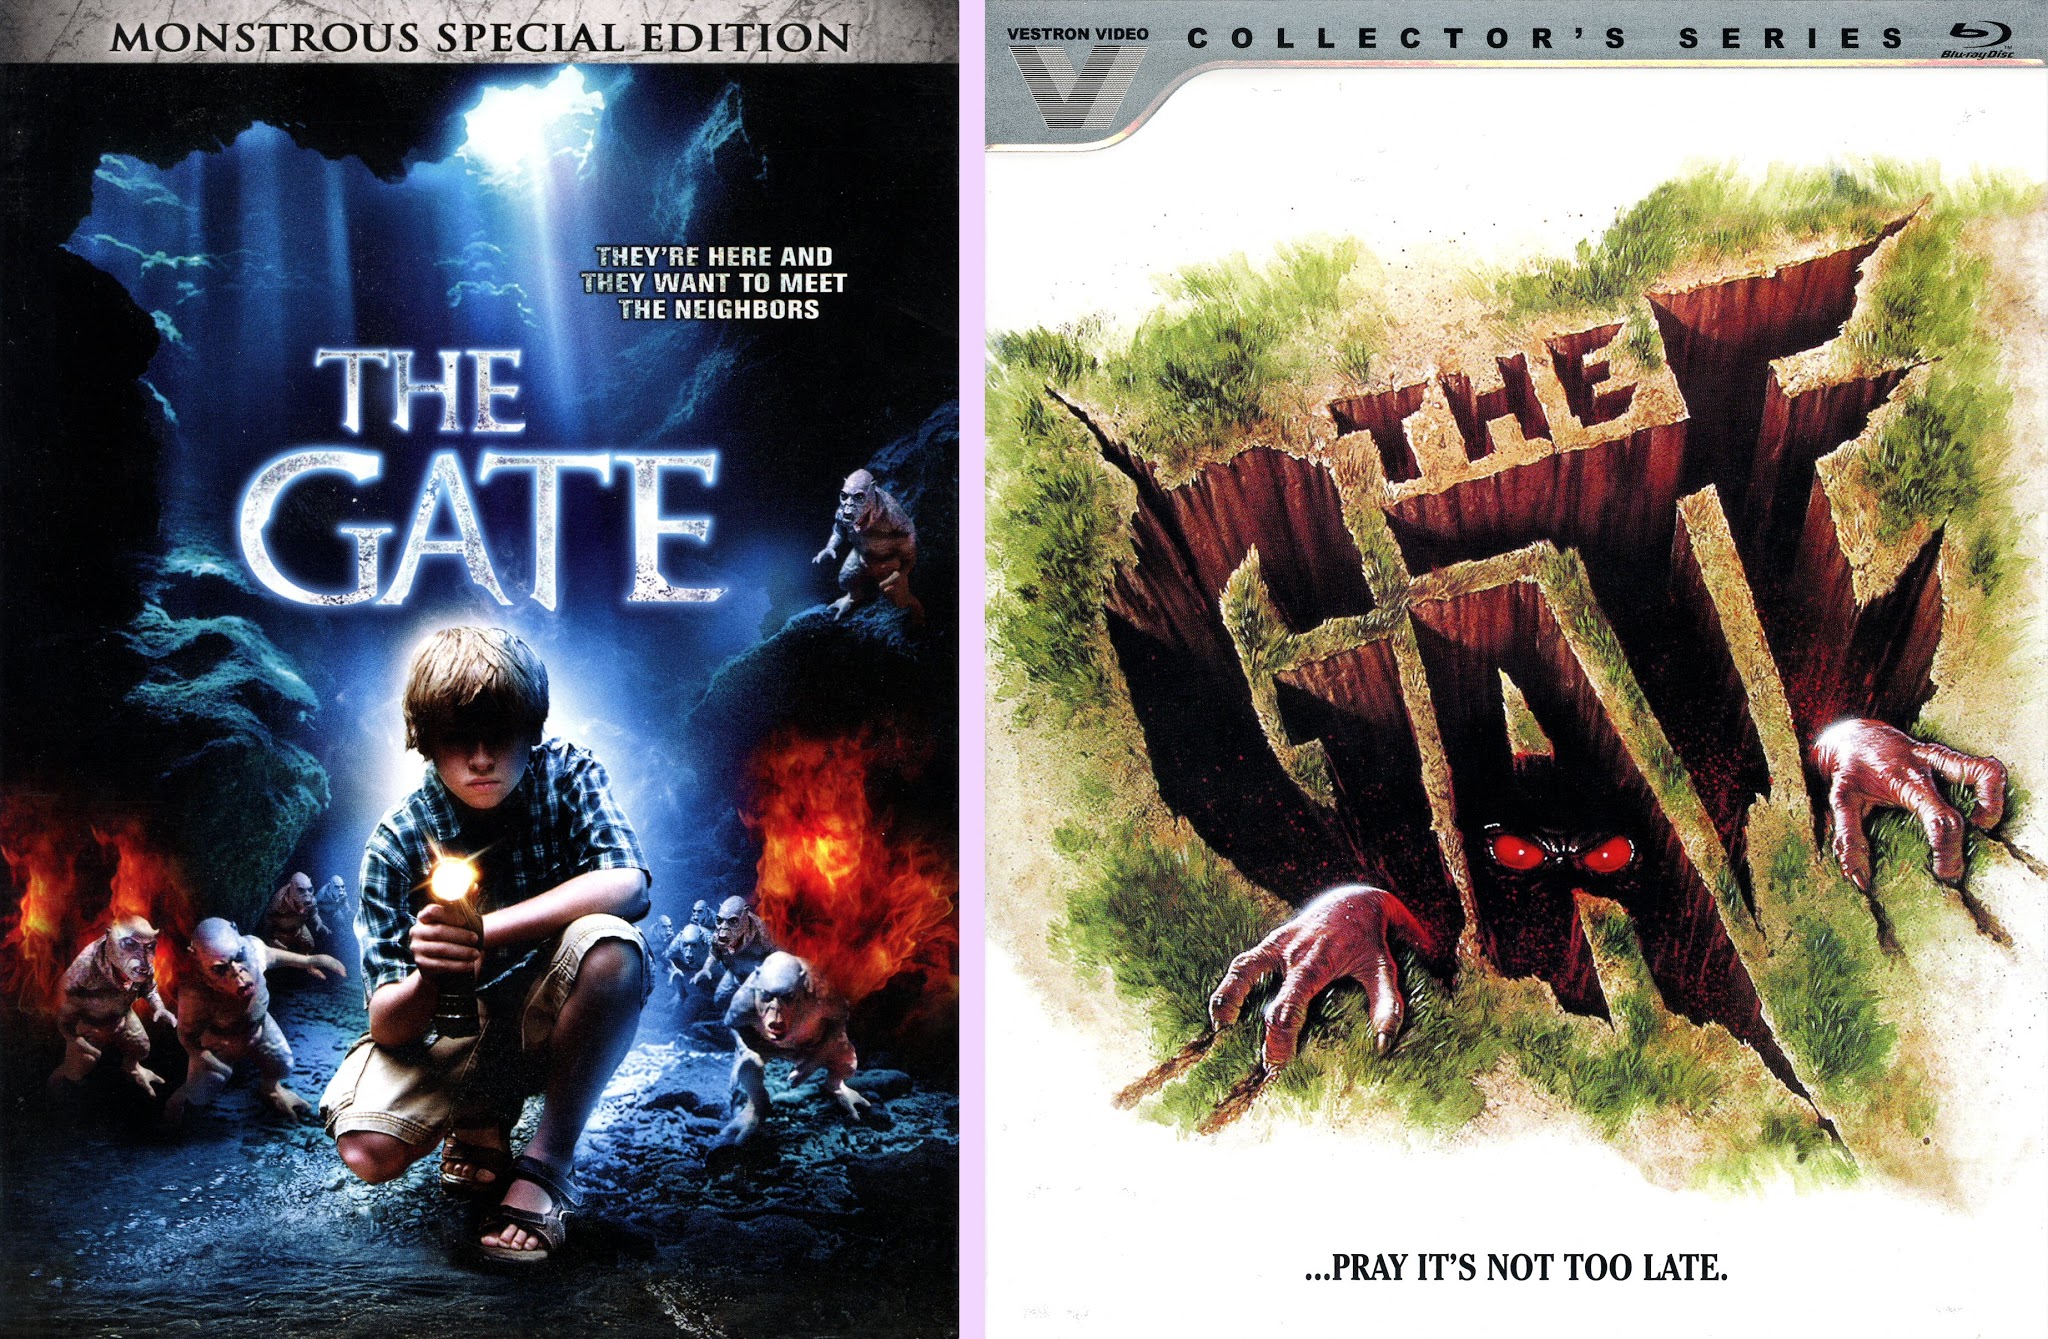 DVD Exotica: The Gate Is Awesome (DVD/ Blu-ray Comparison)